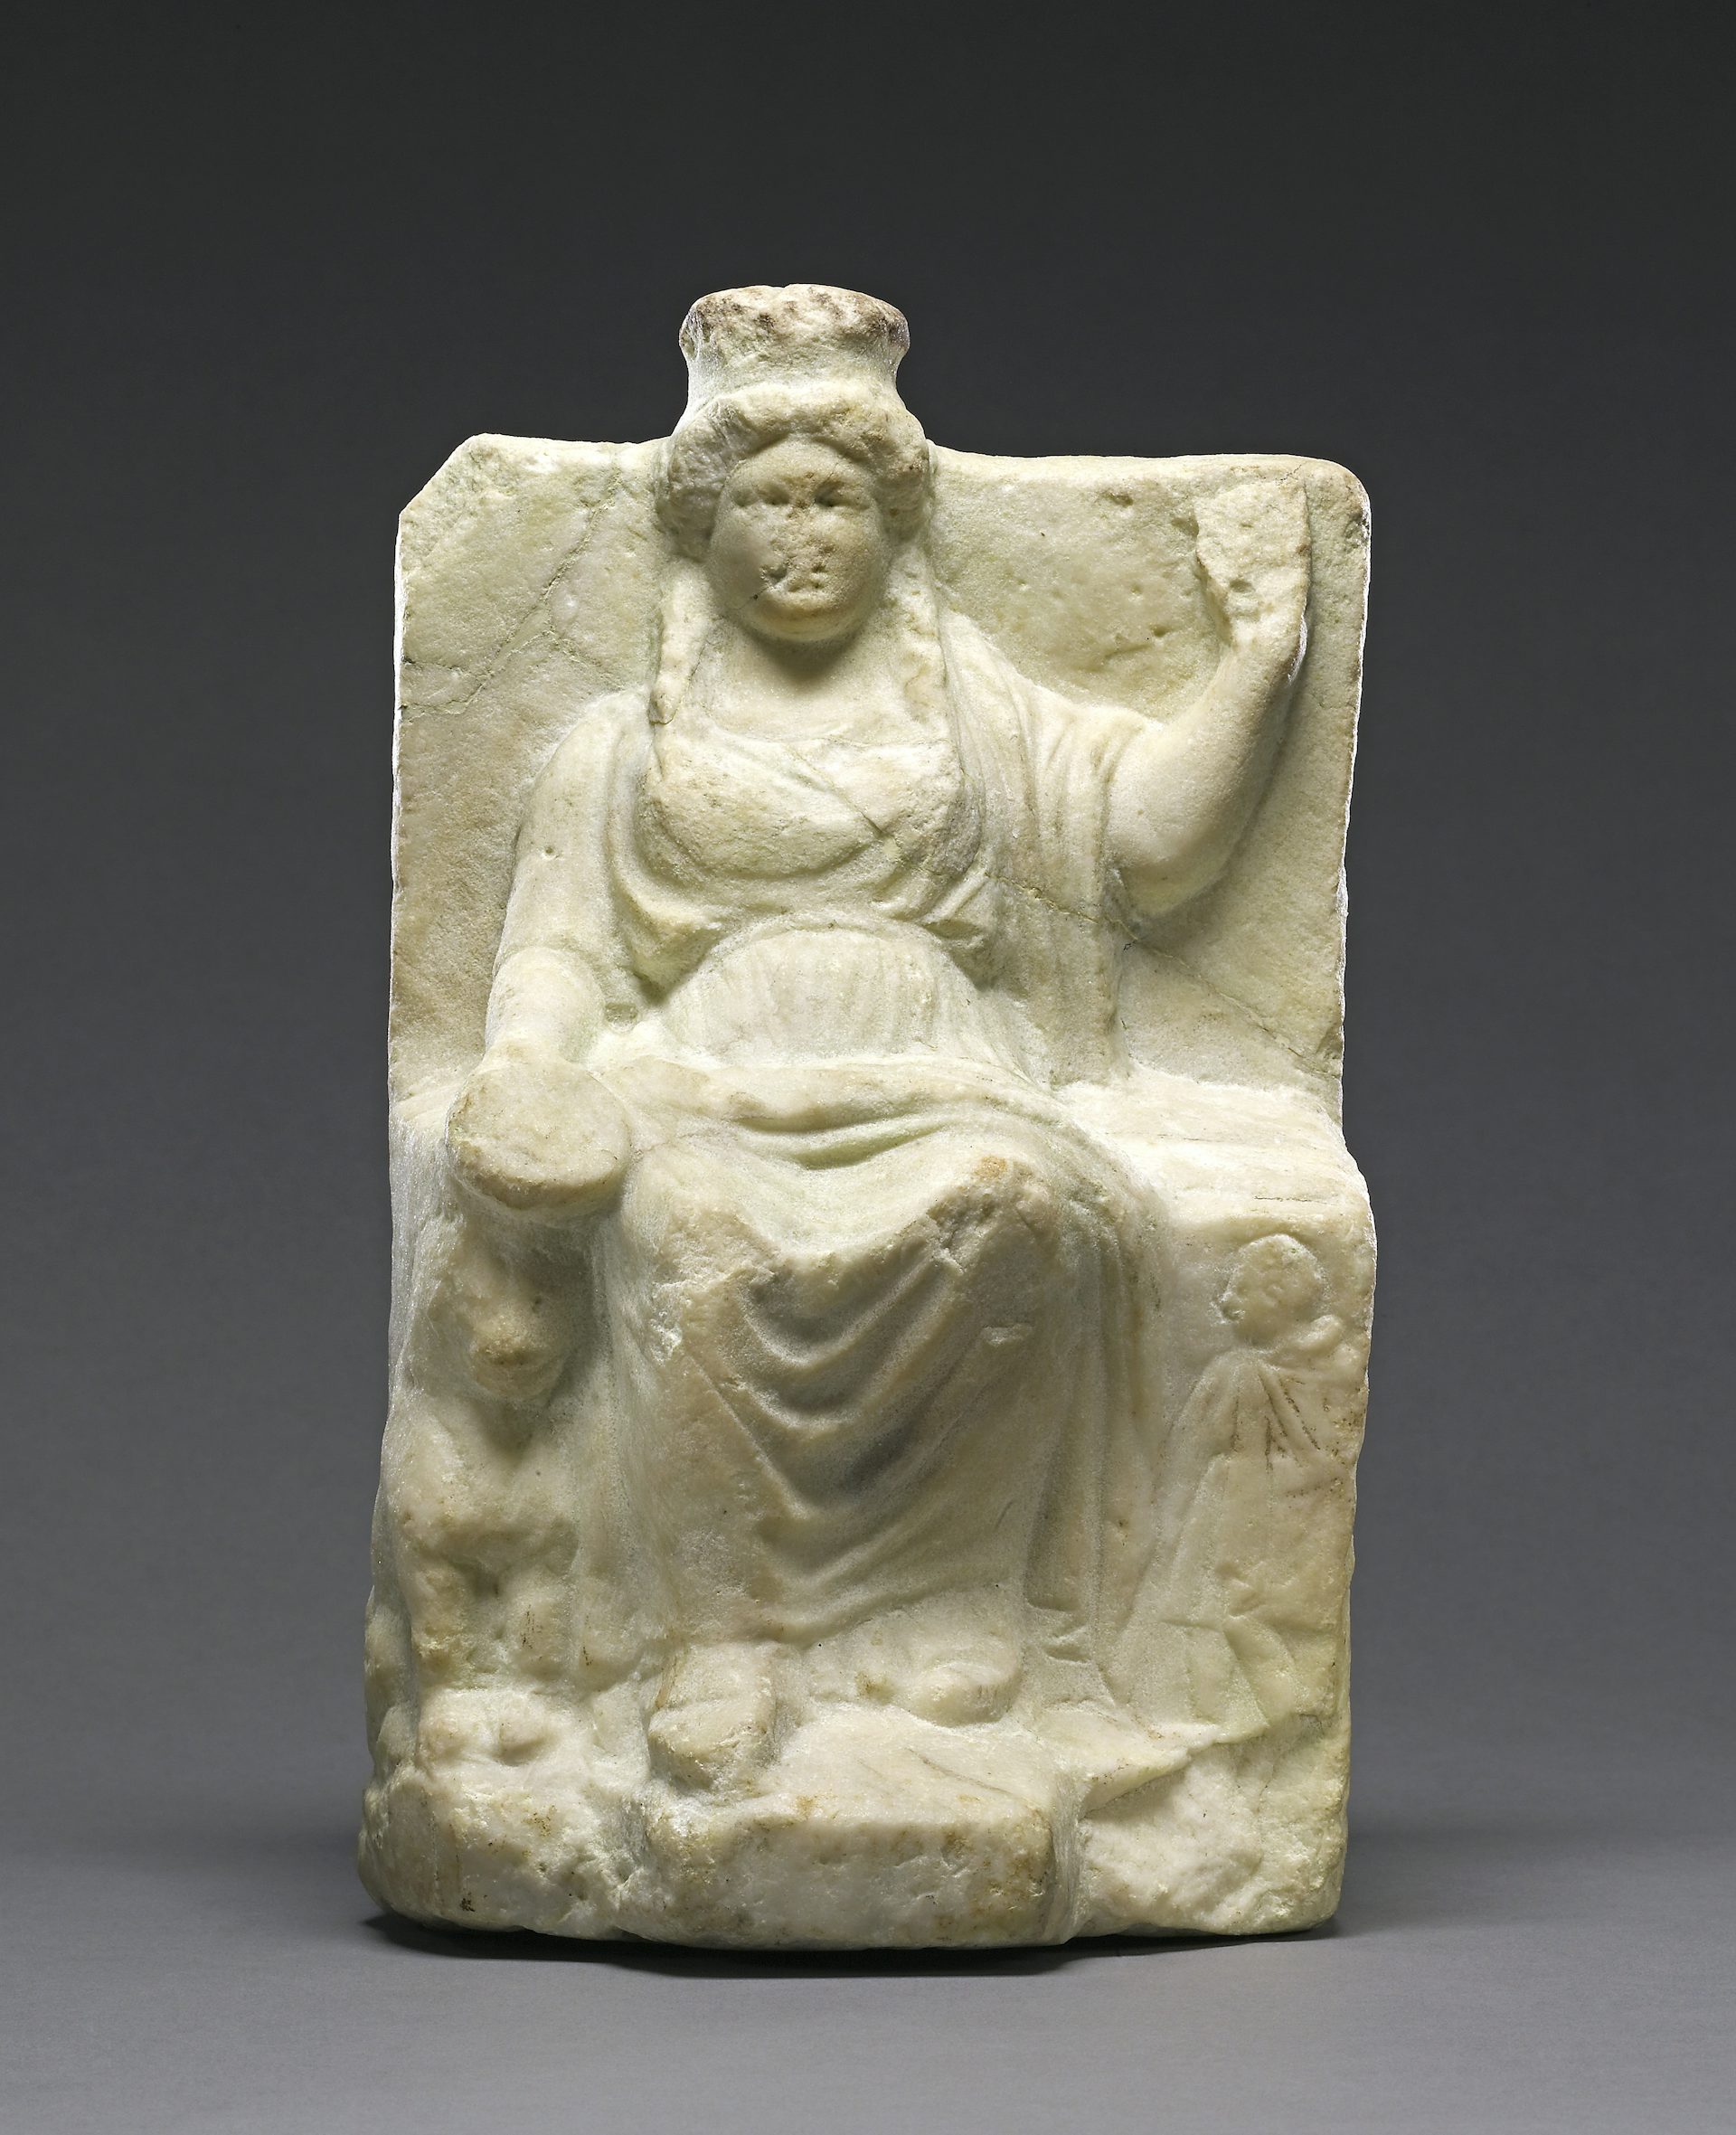 Statuette of seated Cybele, Greek, The Getty Museum